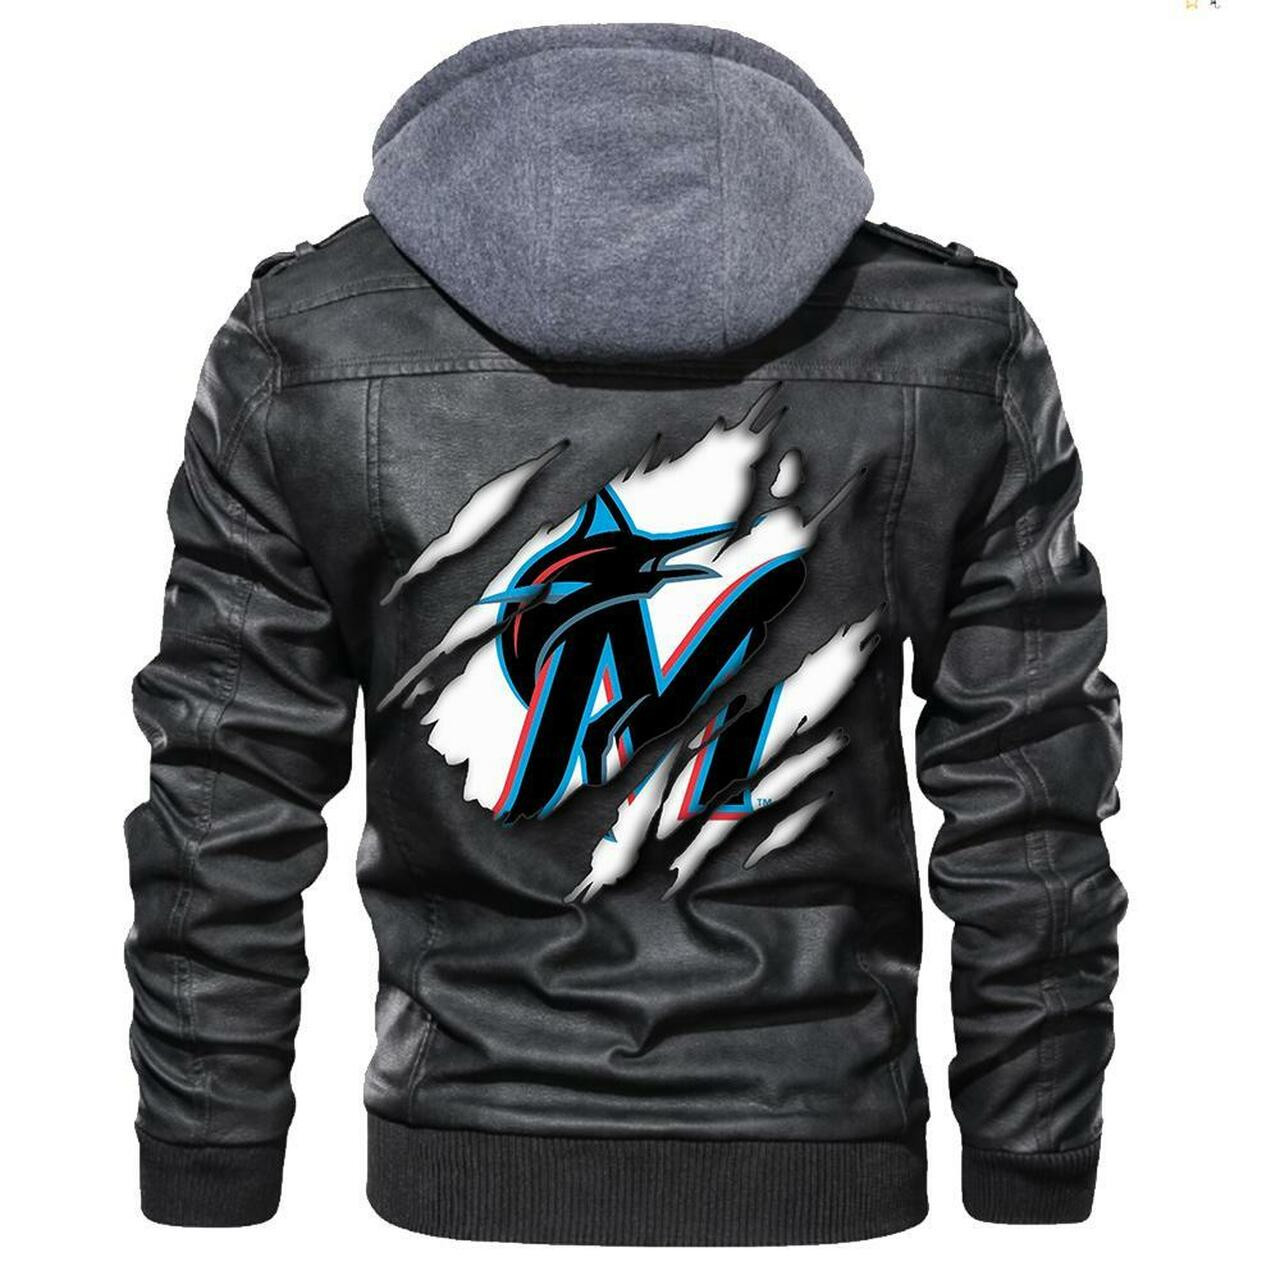 This leather Jacket will look great on you and make you stand out from the crowd 373